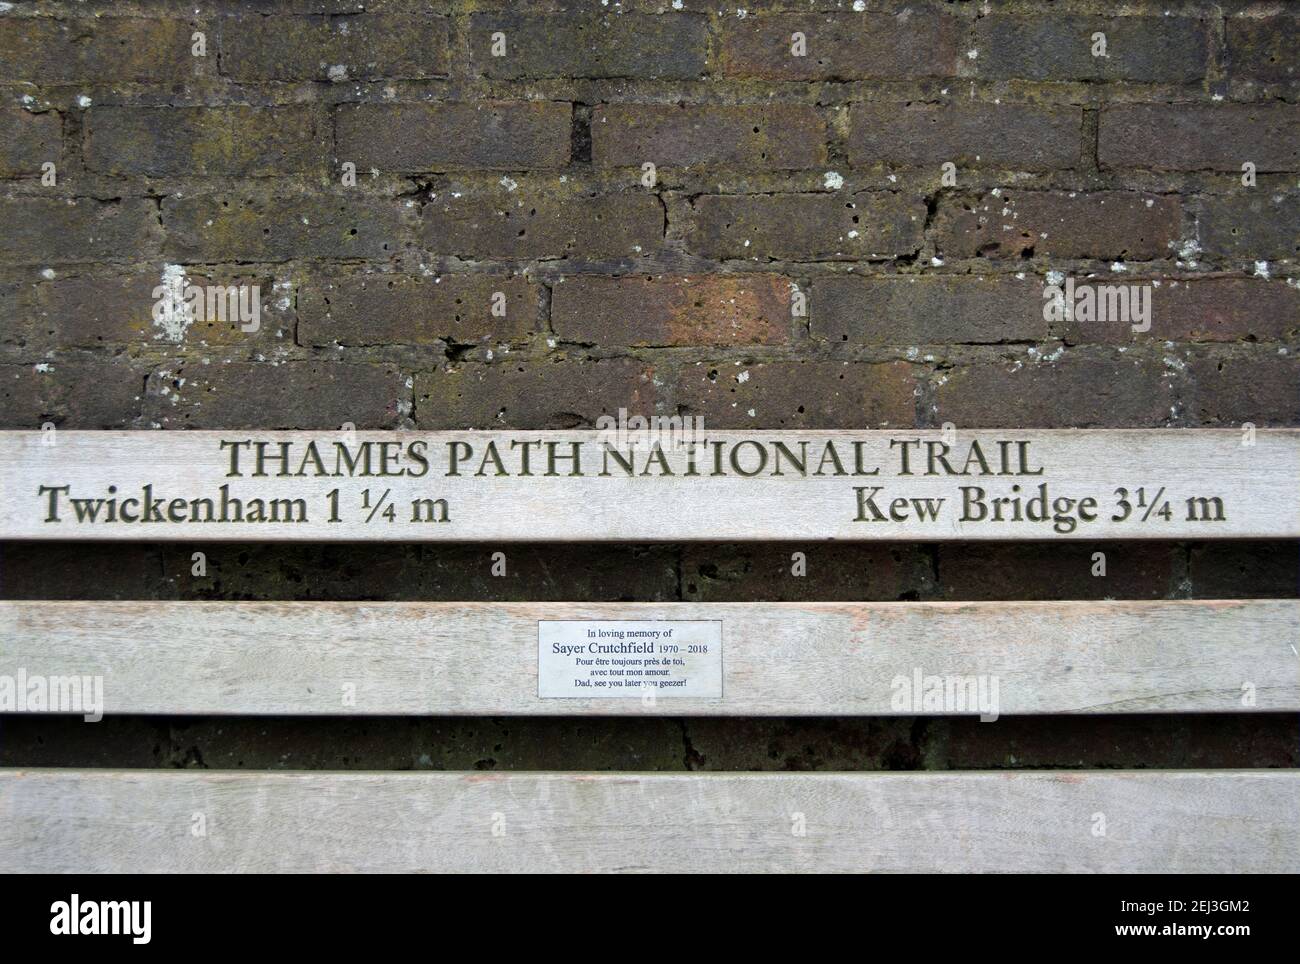 bench on the thames path national trail showing distances to twickenham and kew bridge, london, england, and with a memorial plaque Stock Photo